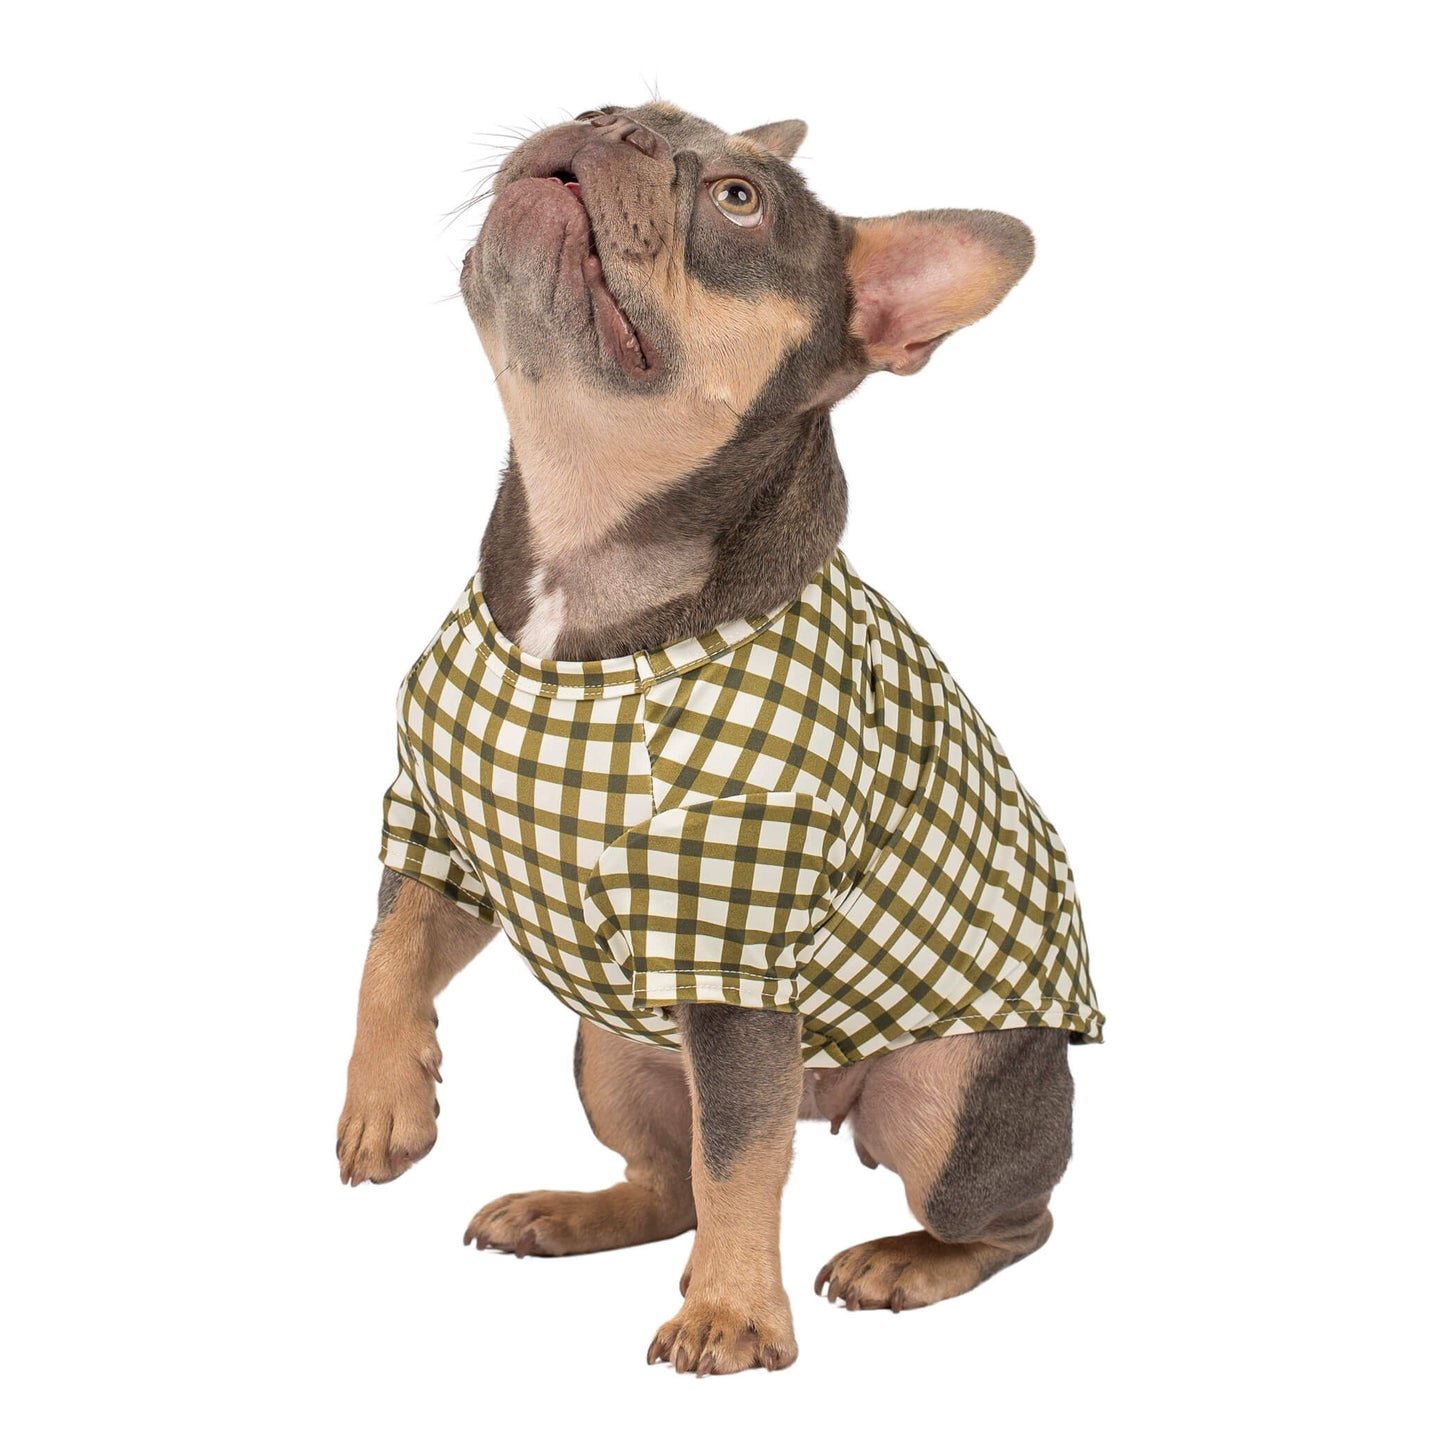 A French Bulldog with one paw off the ground. It is wearing Vibrant Hounds Green GIngham Rash shirt.